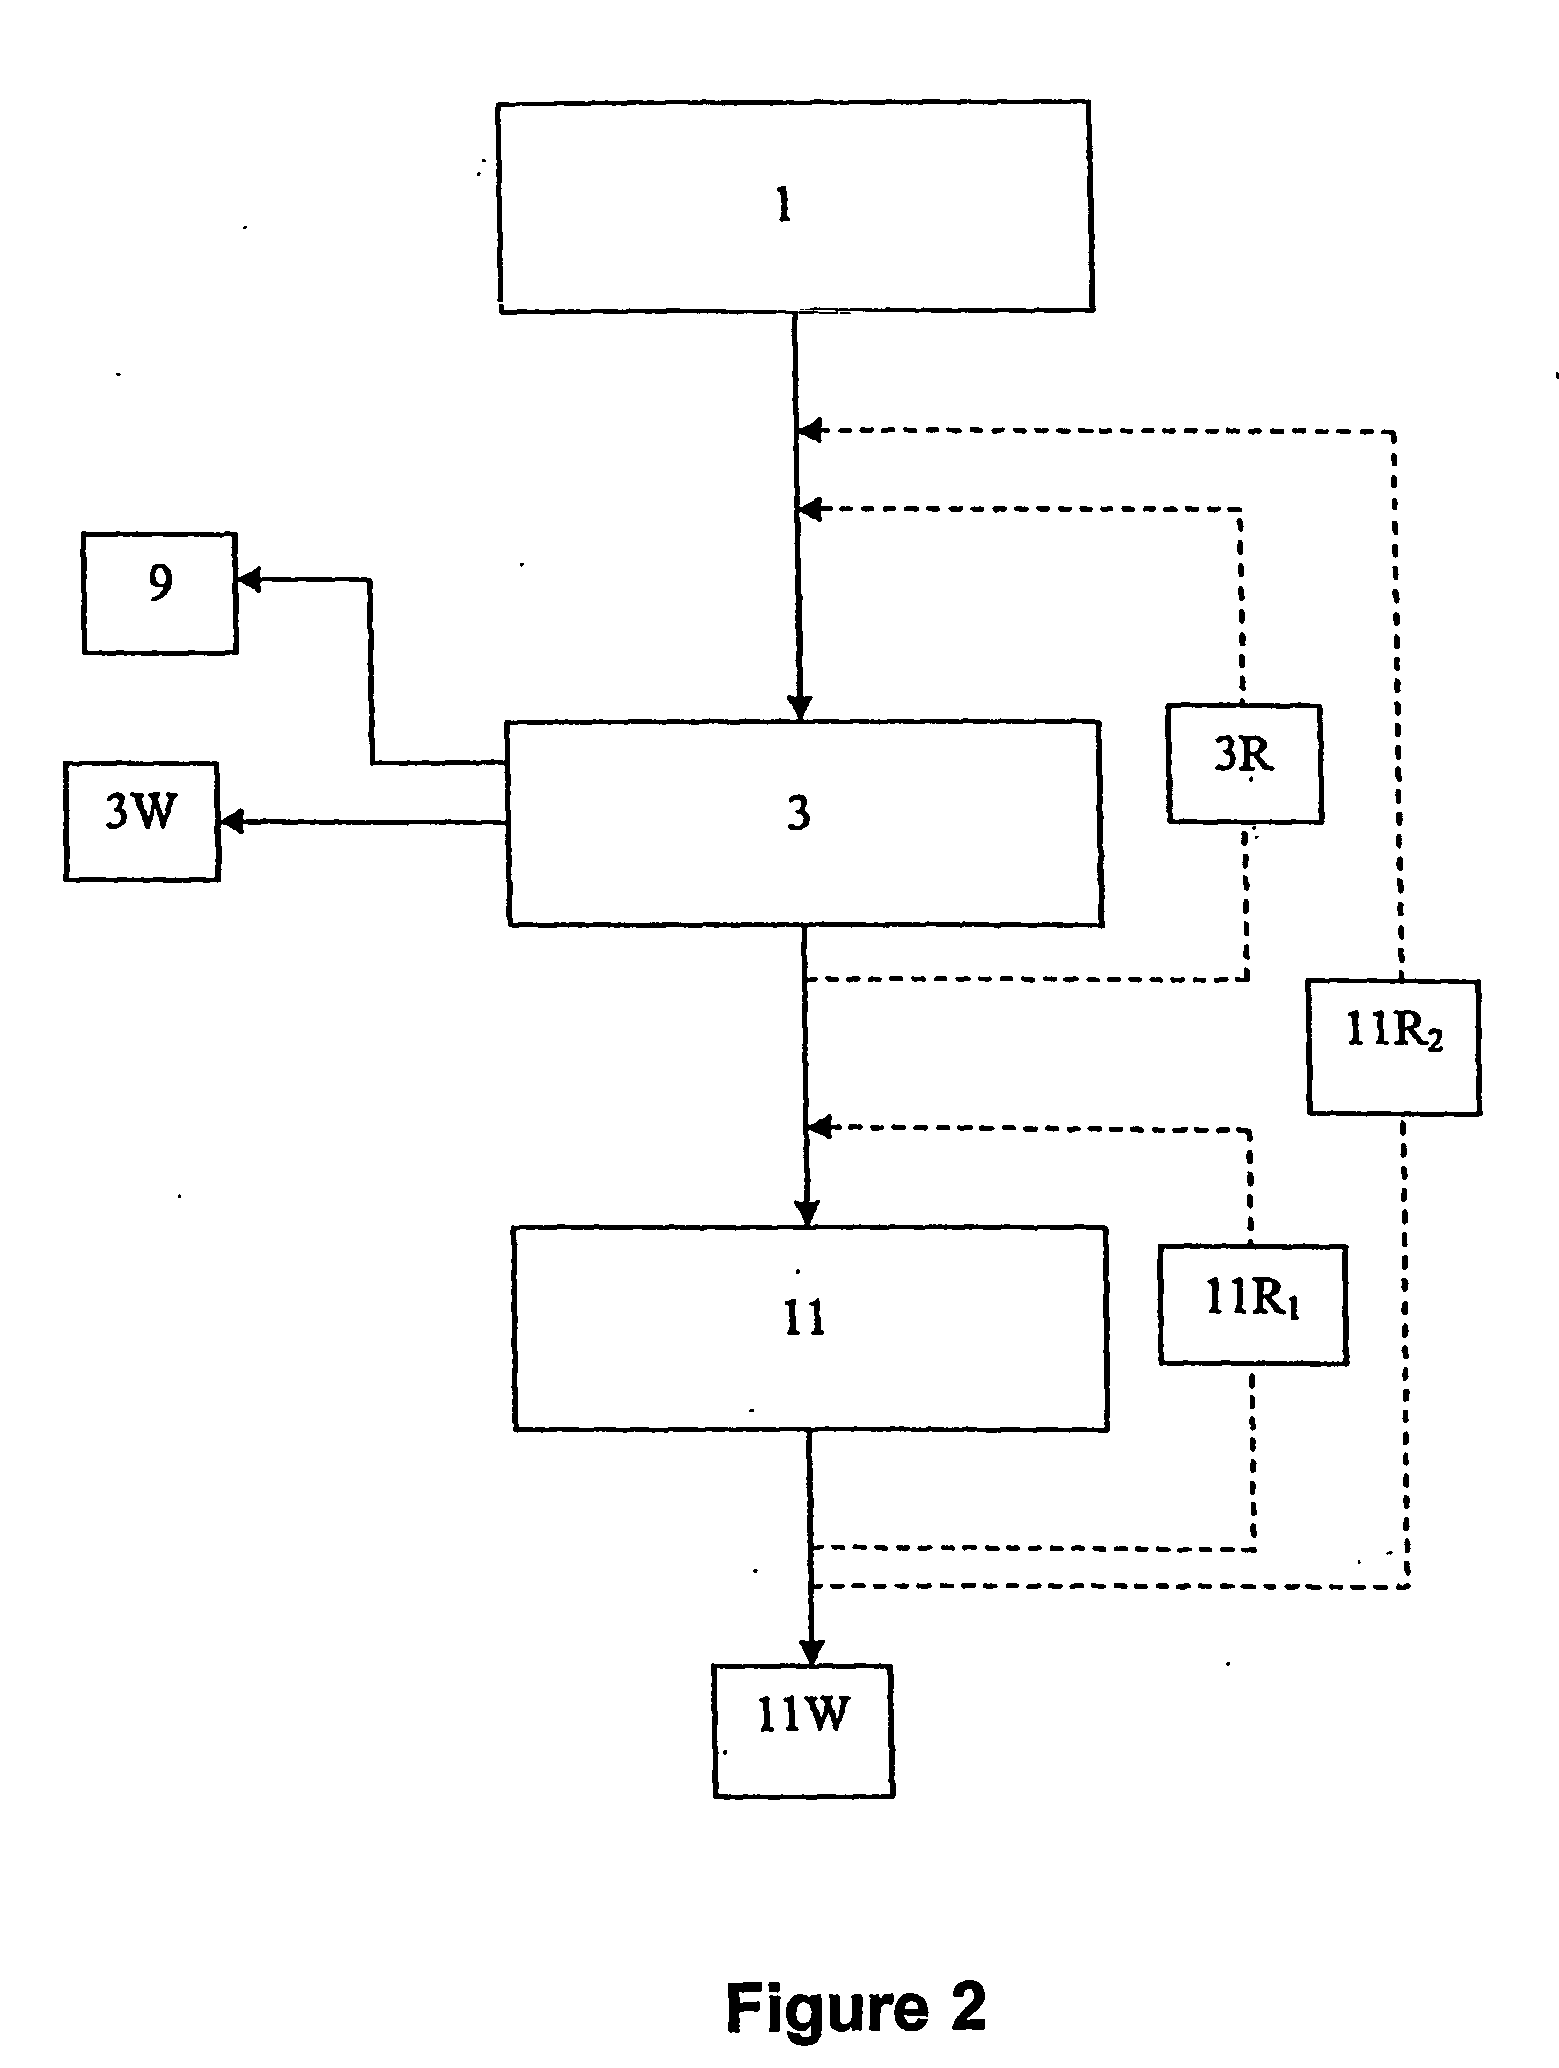 Separation apparatus and method